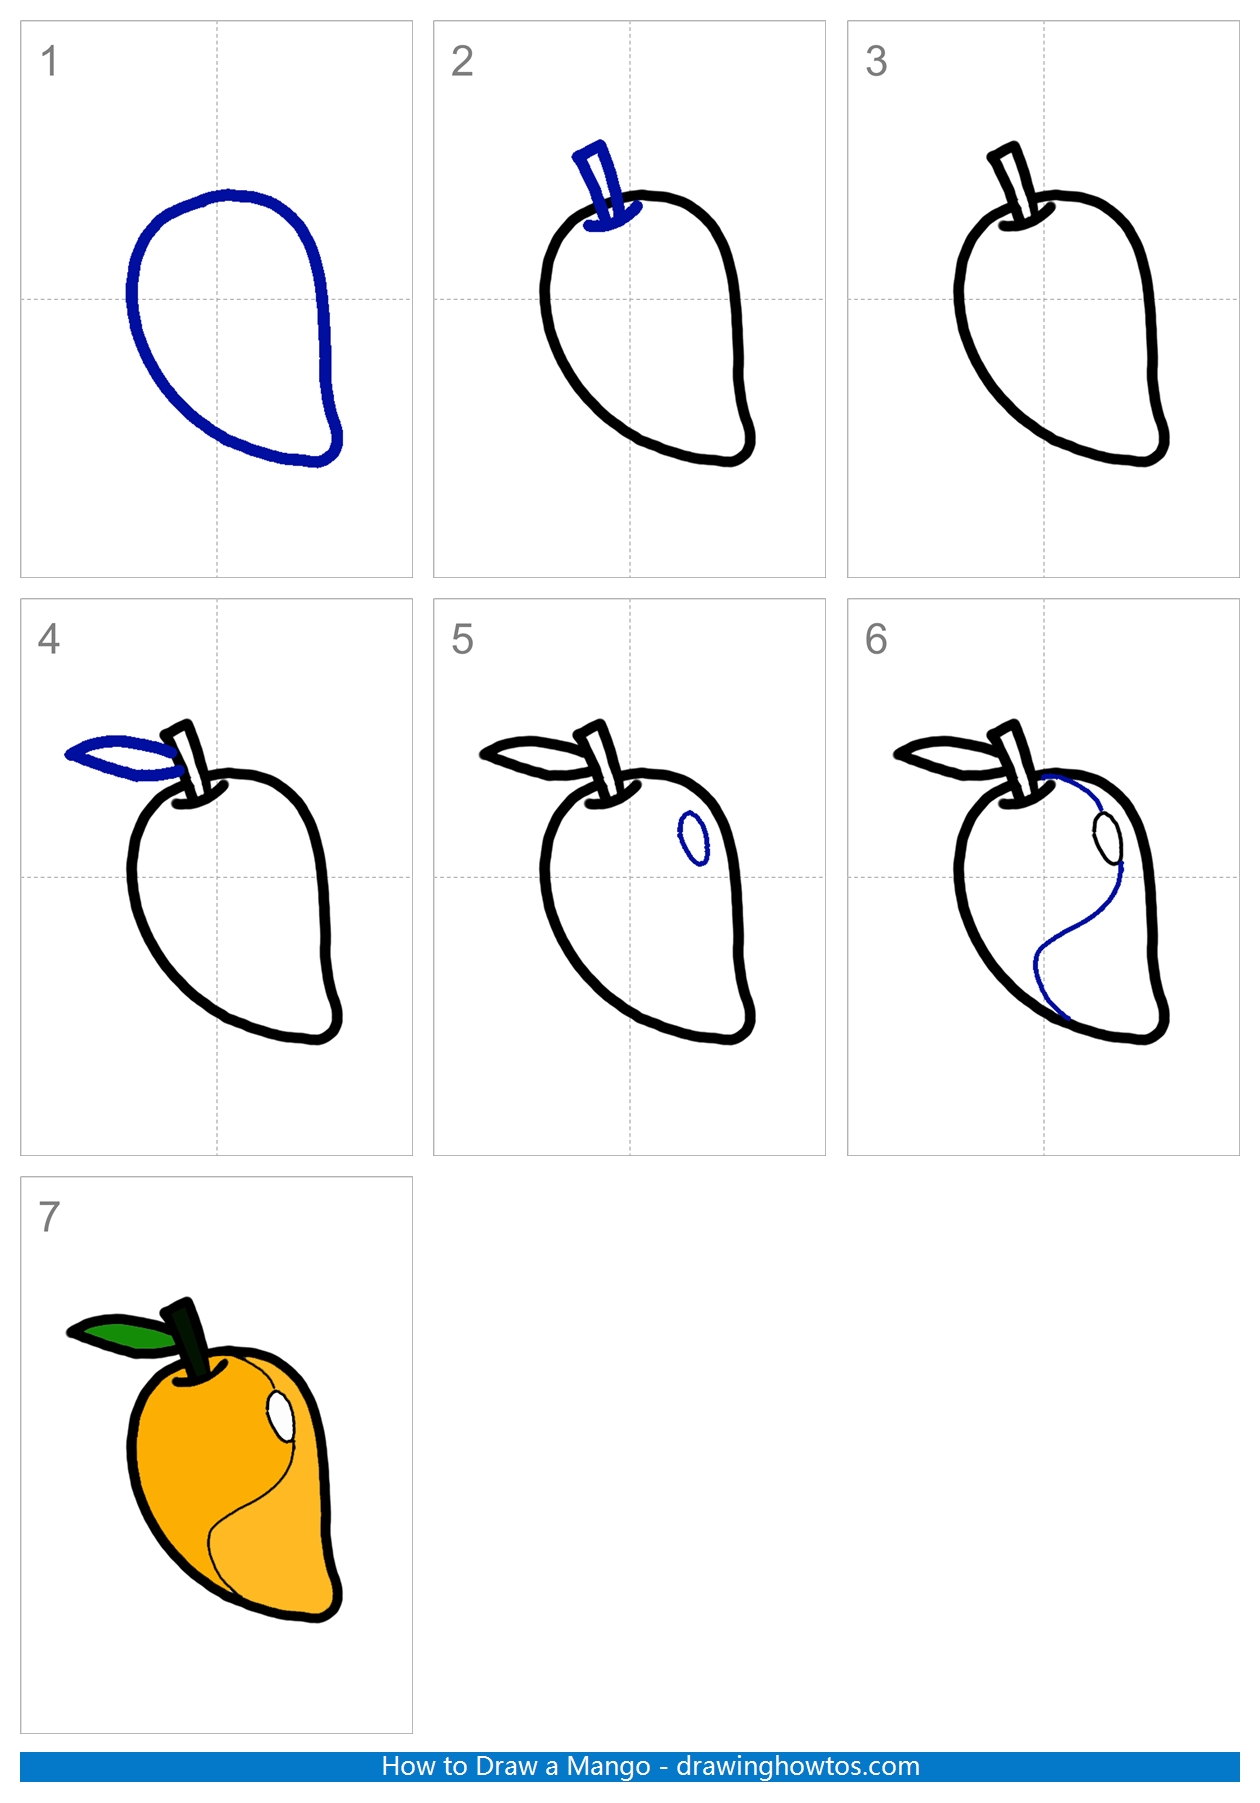 How to Draw a Mango Step by Step - Cute Easy Drawings